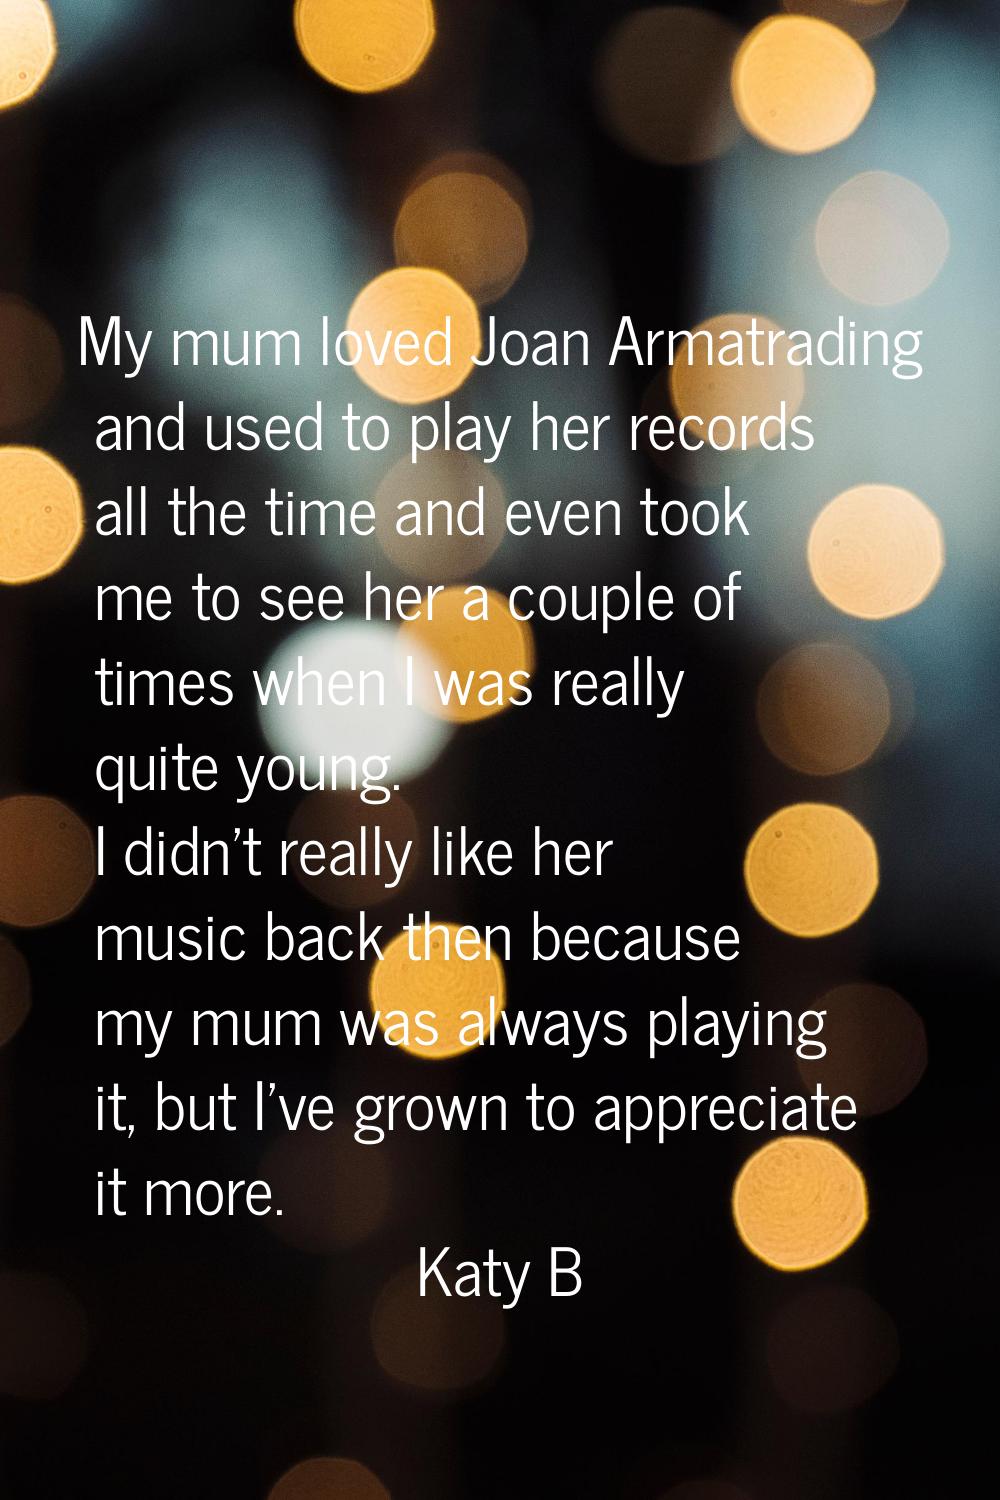 My mum loved Joan Armatrading and used to play her records all the time and even took me to see her